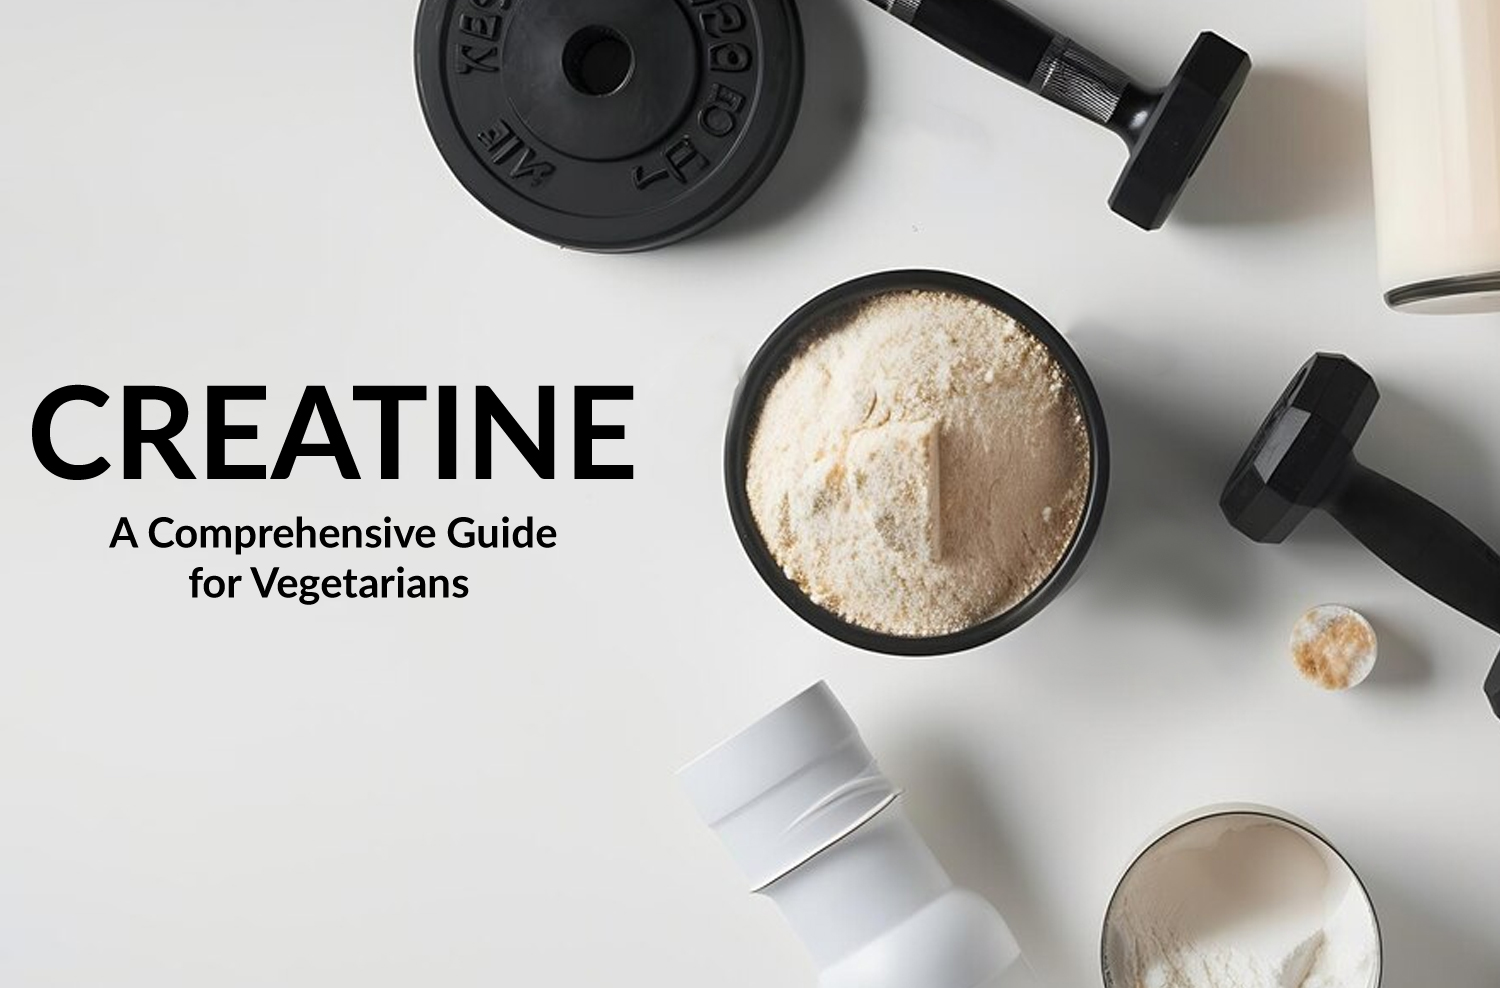 Is Creatine Veg or Non Veg? Find Out Here